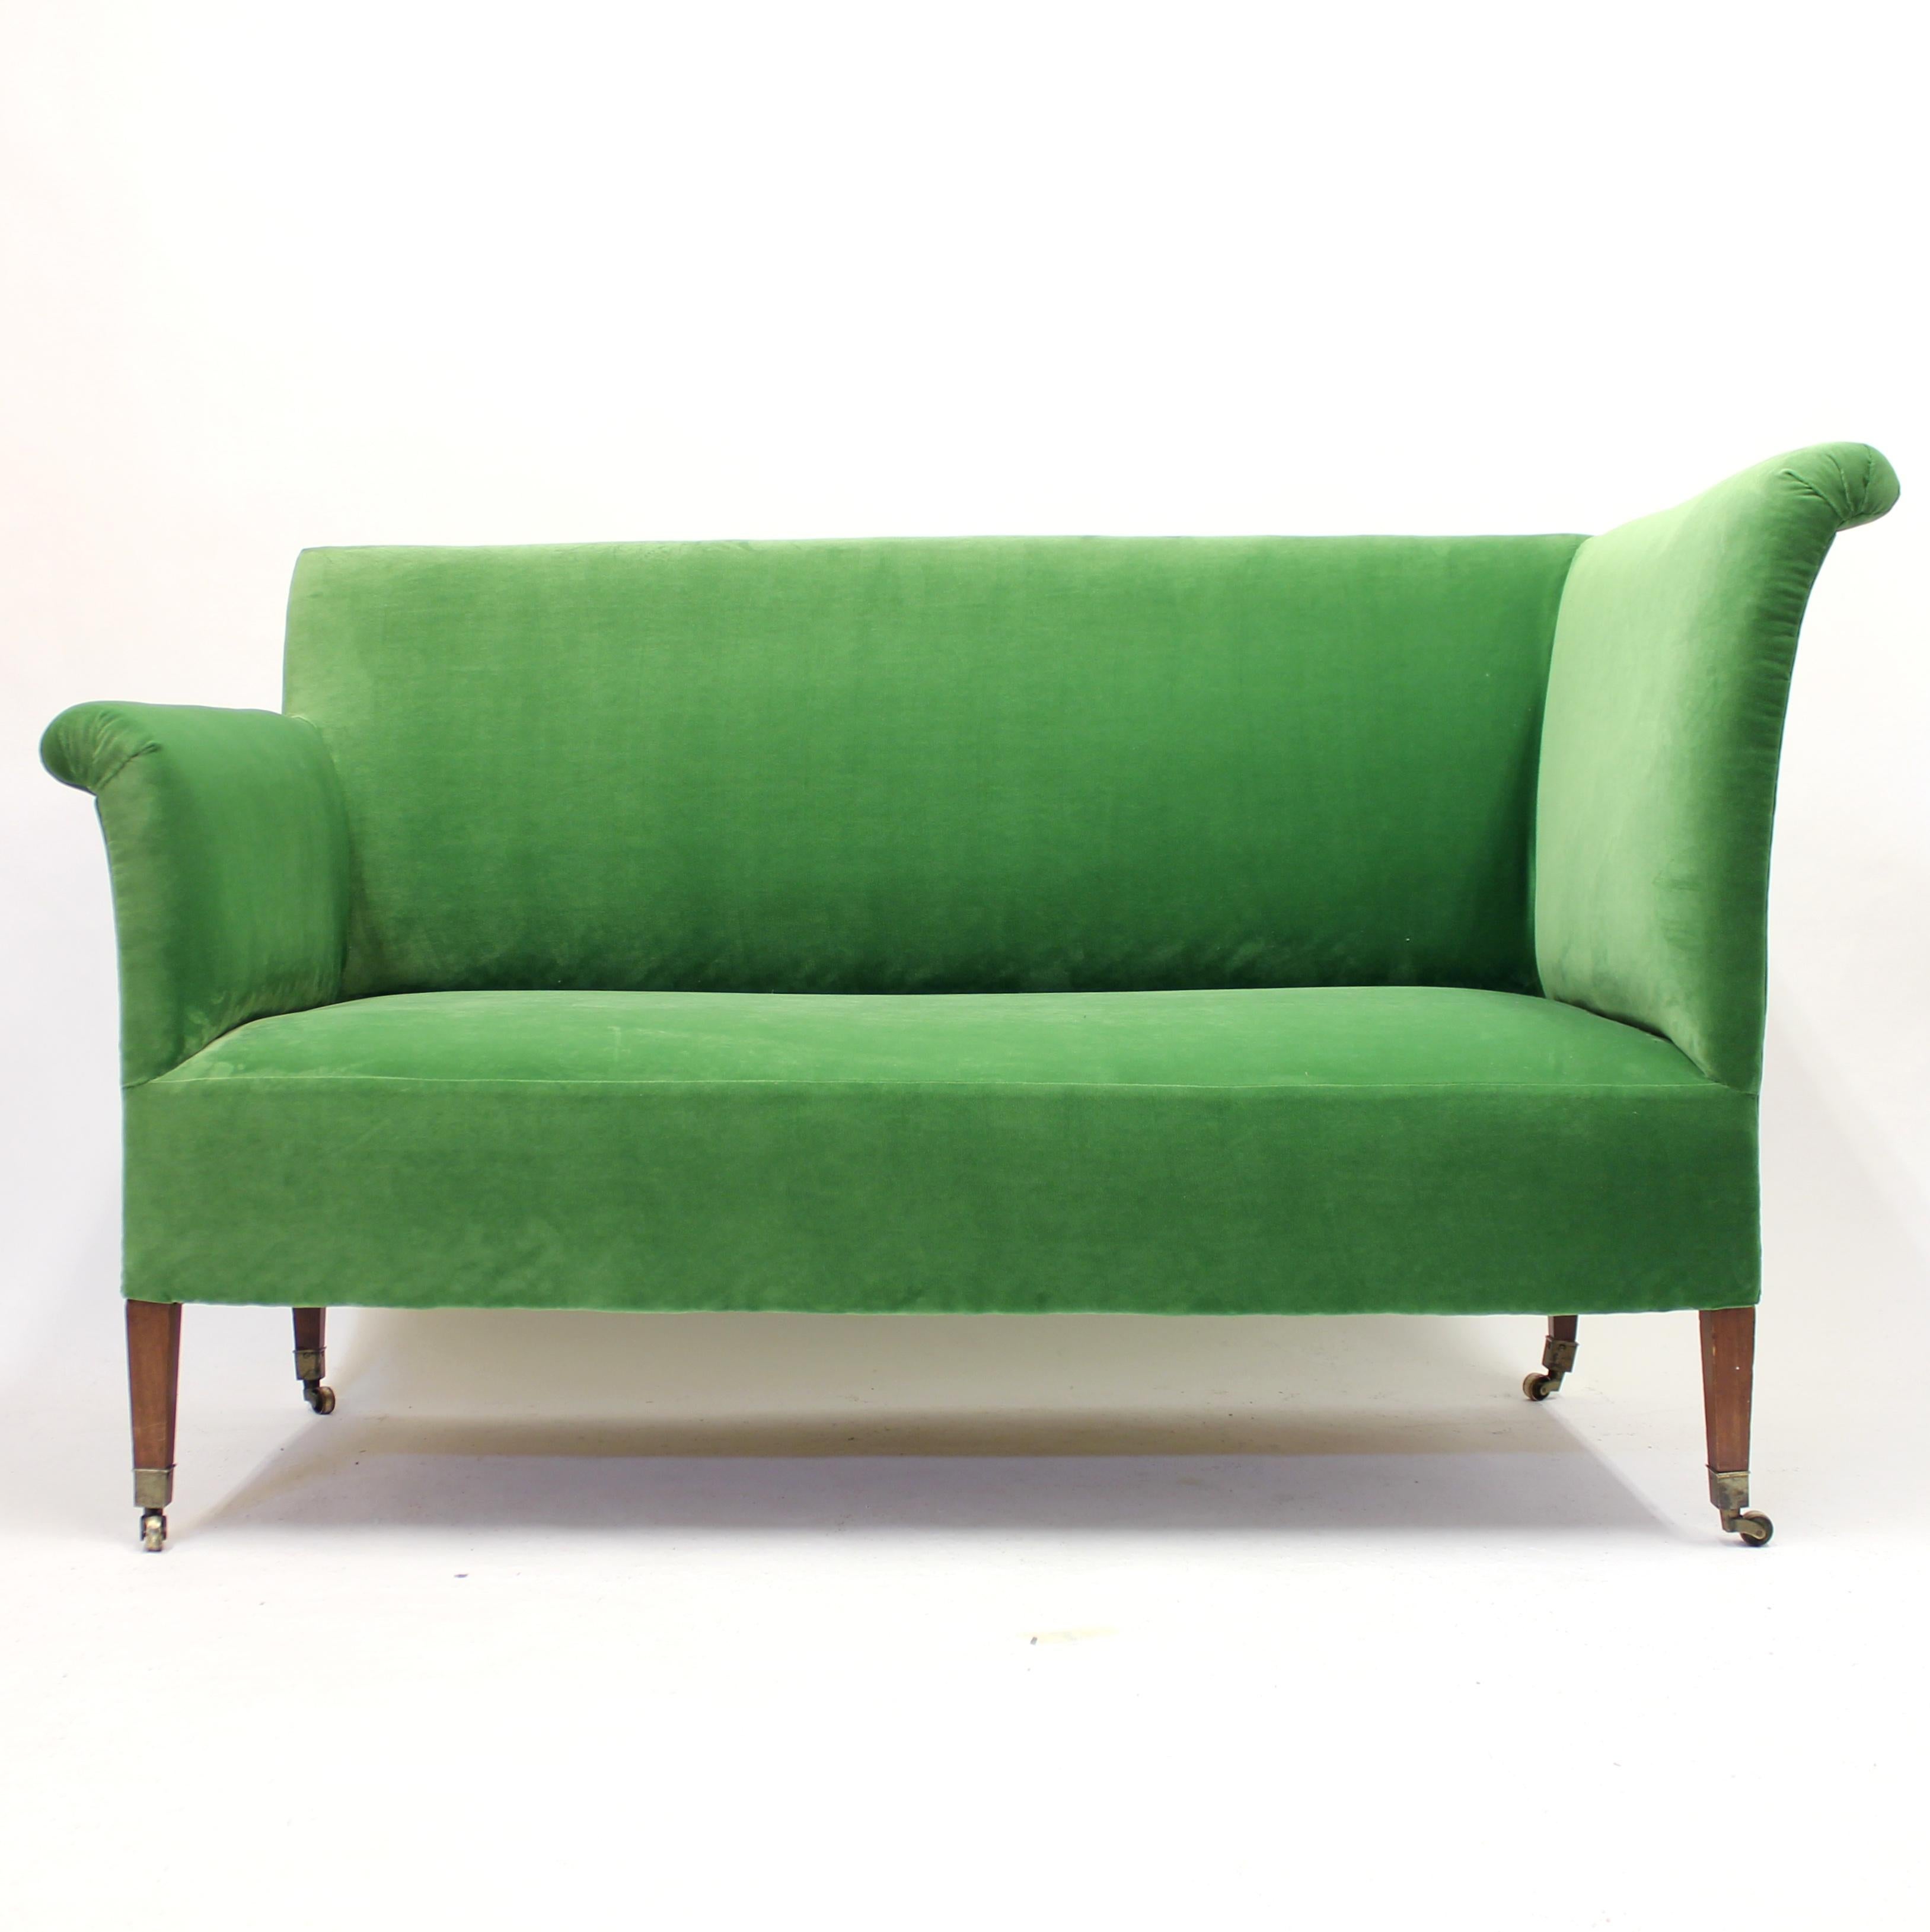 Rare asymmetric sofa with brass castors on mahogany legs from the early 20th century. The two armrests are totally different in height which creates a very unusual and eclectic shape one seldom sees from this period. New grass green velvet